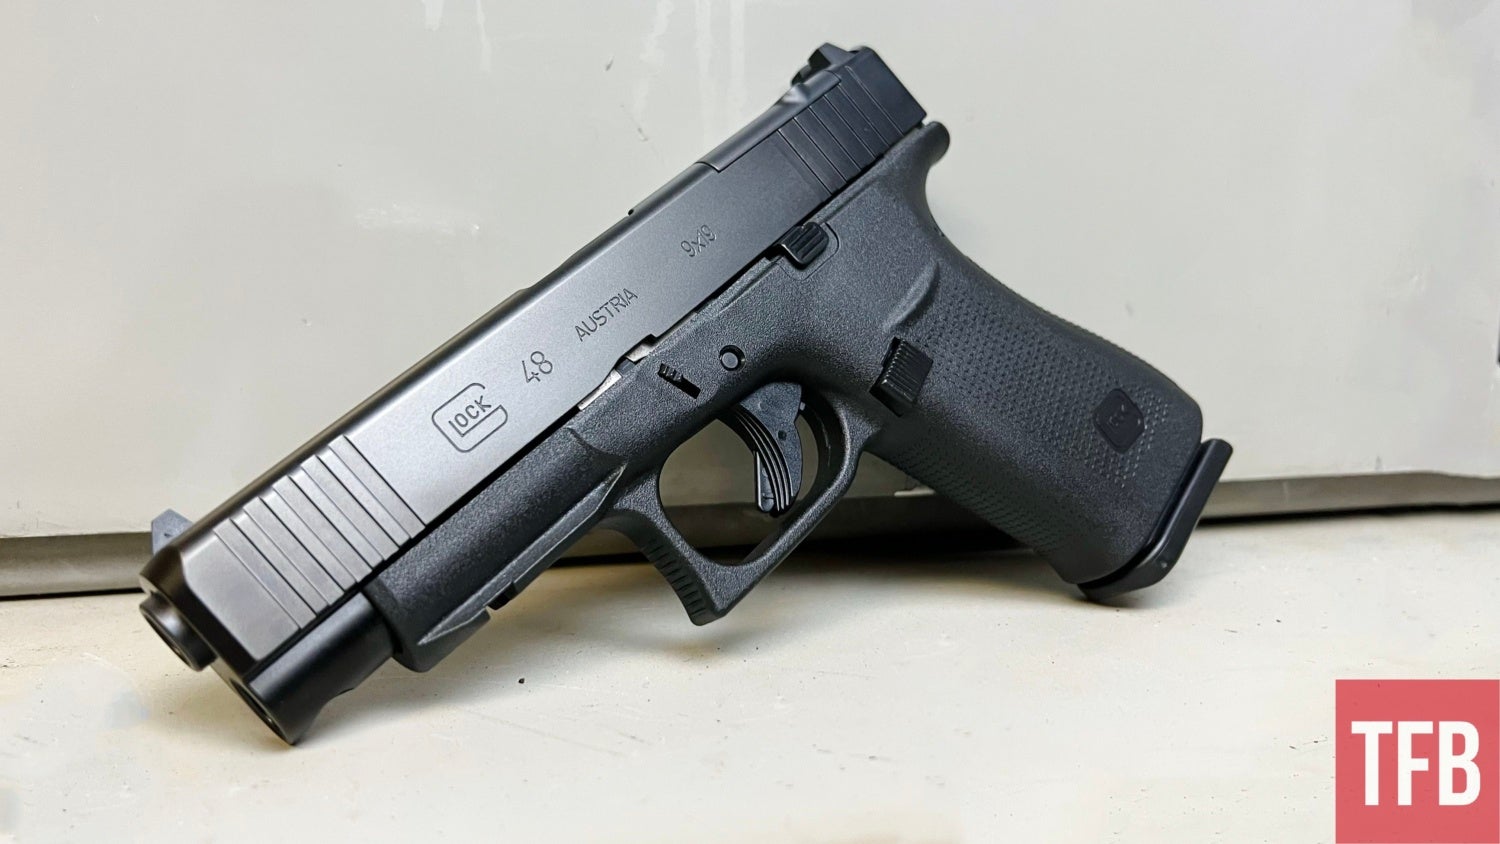 Concealed Carry Corner: Top Options for Summer Carry